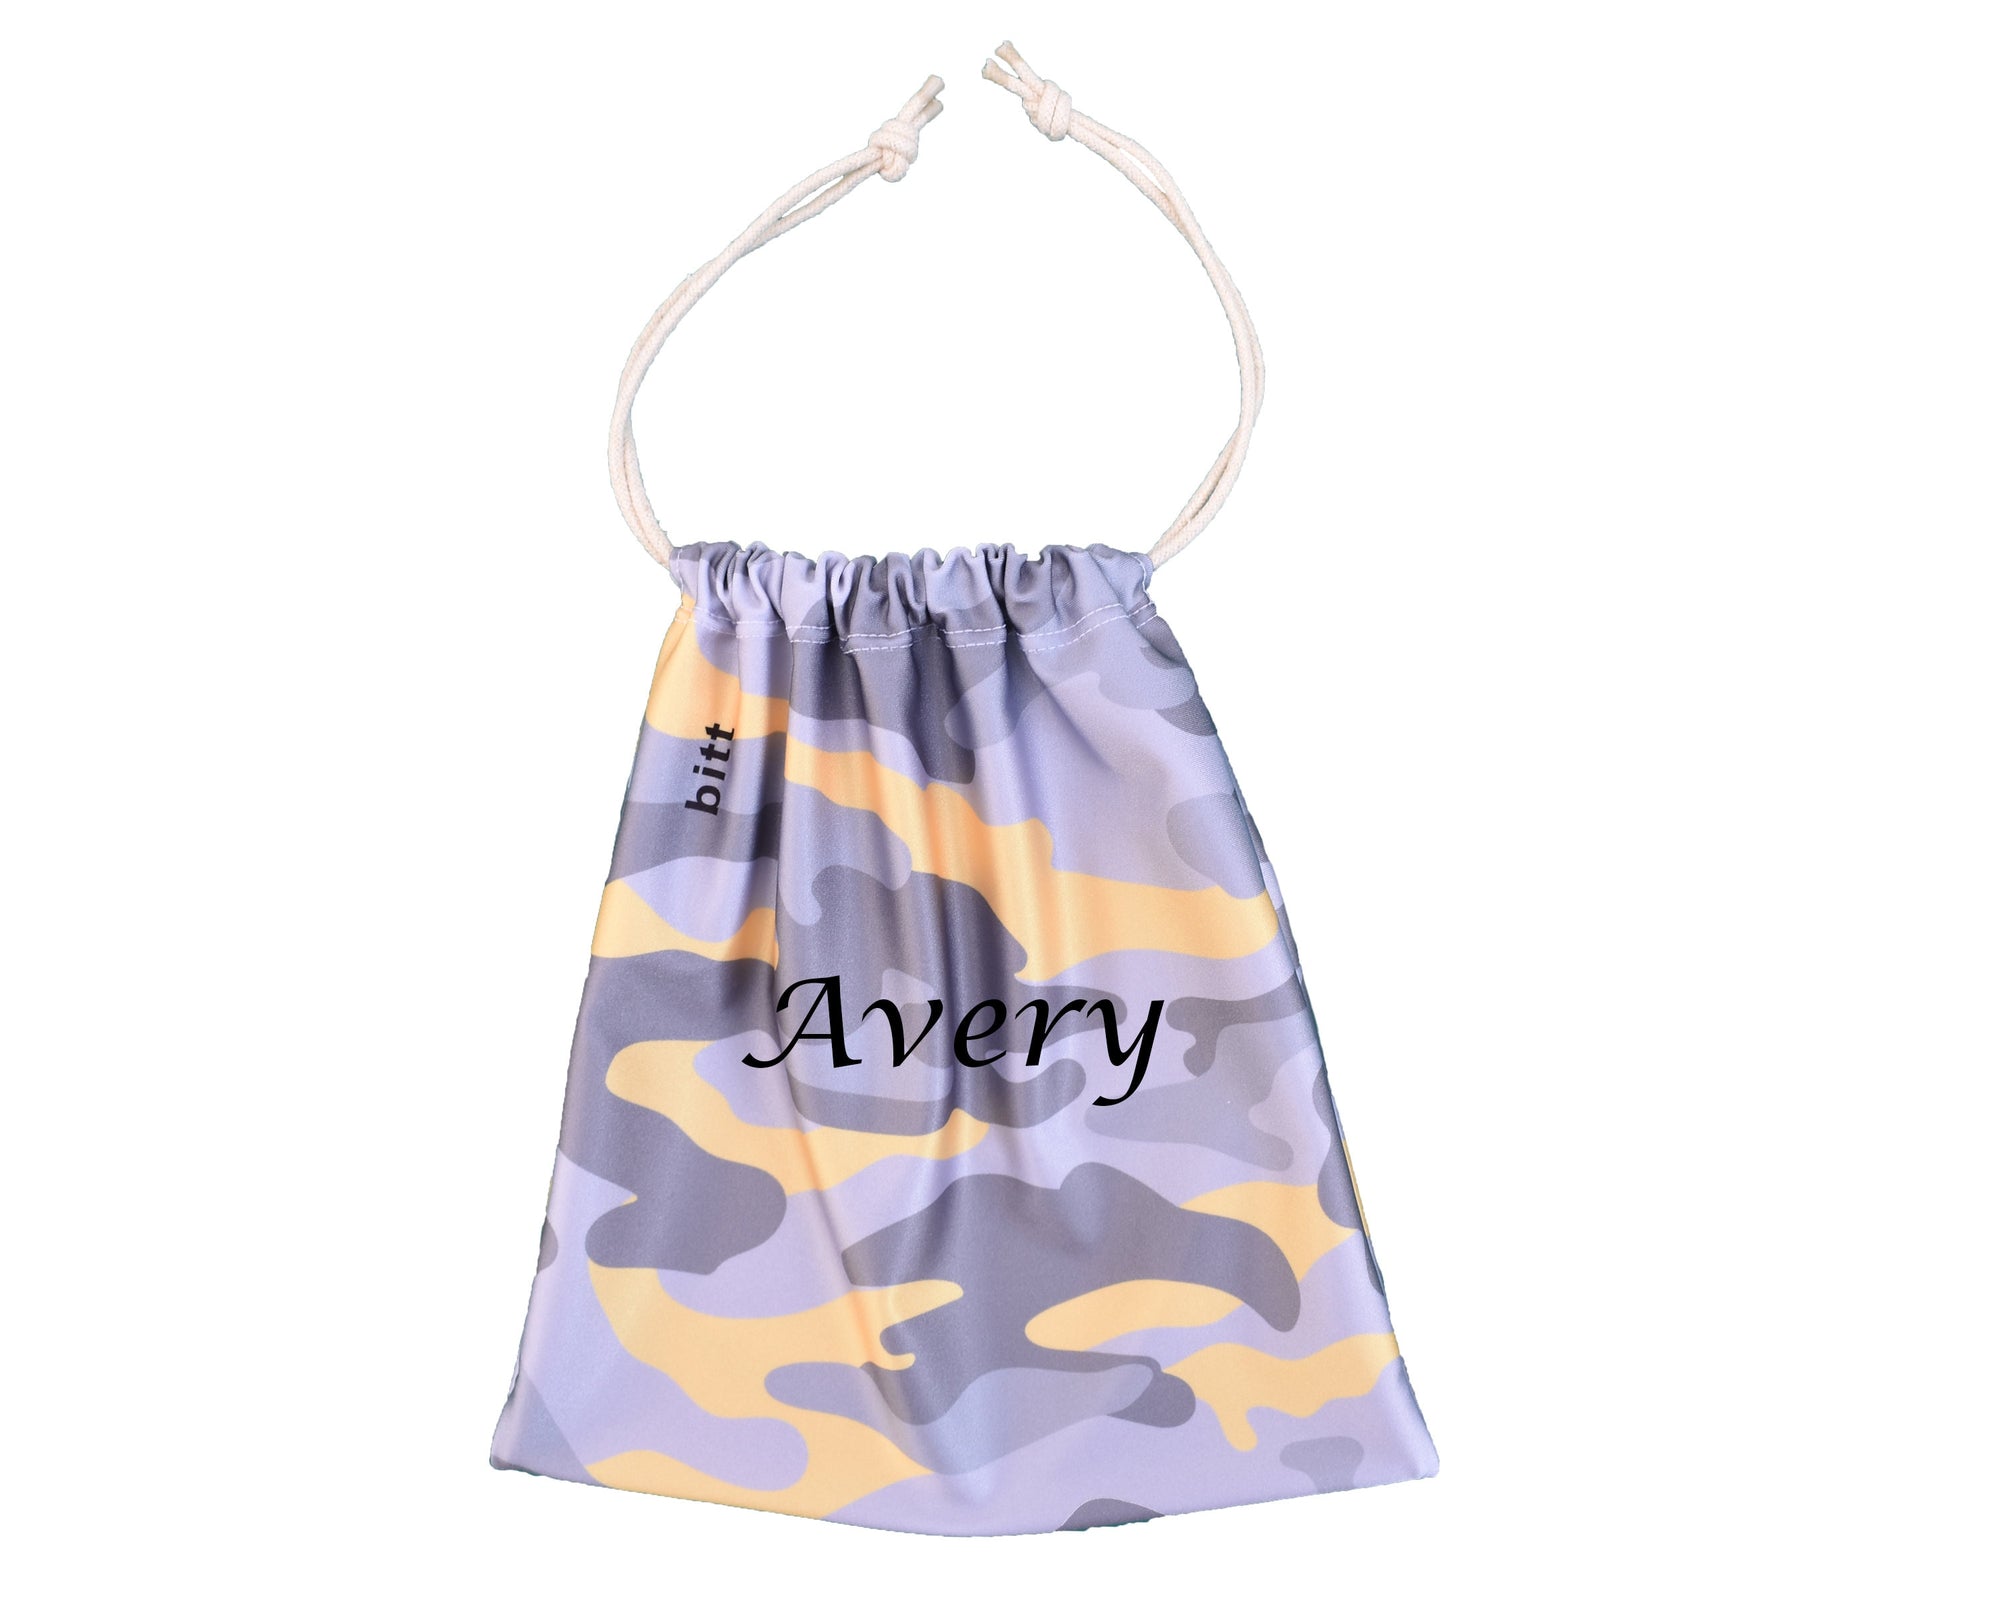 Personalized Gymnastics Grip Bag in Yellow Camouflage